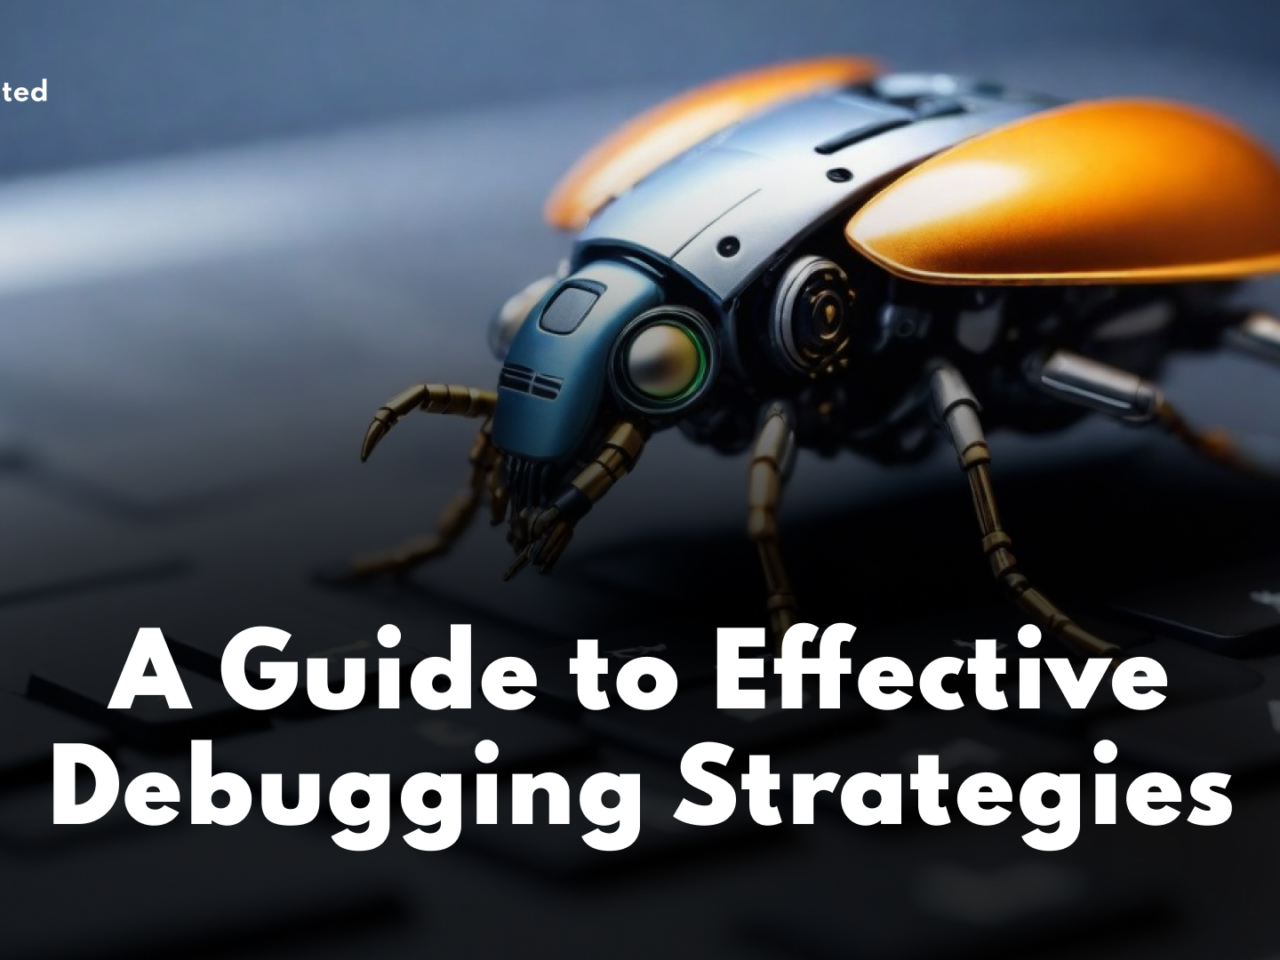 The Ultimate Guide to Effective Debugging Strategies